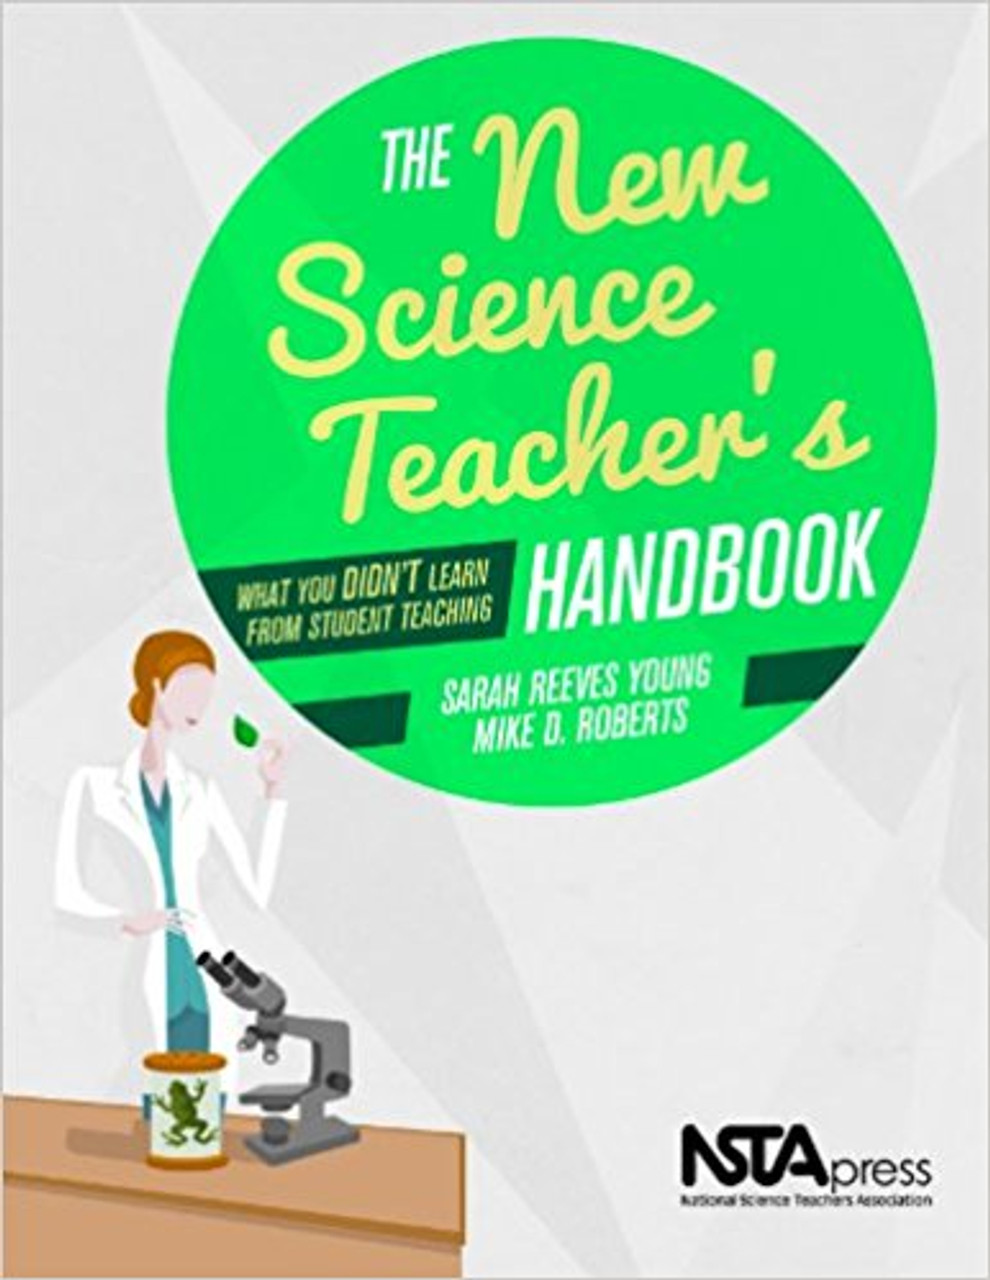 The New Science Teacher's Handbook: What You Didn't Learn from Student Teaching by Sarah Reeves Young